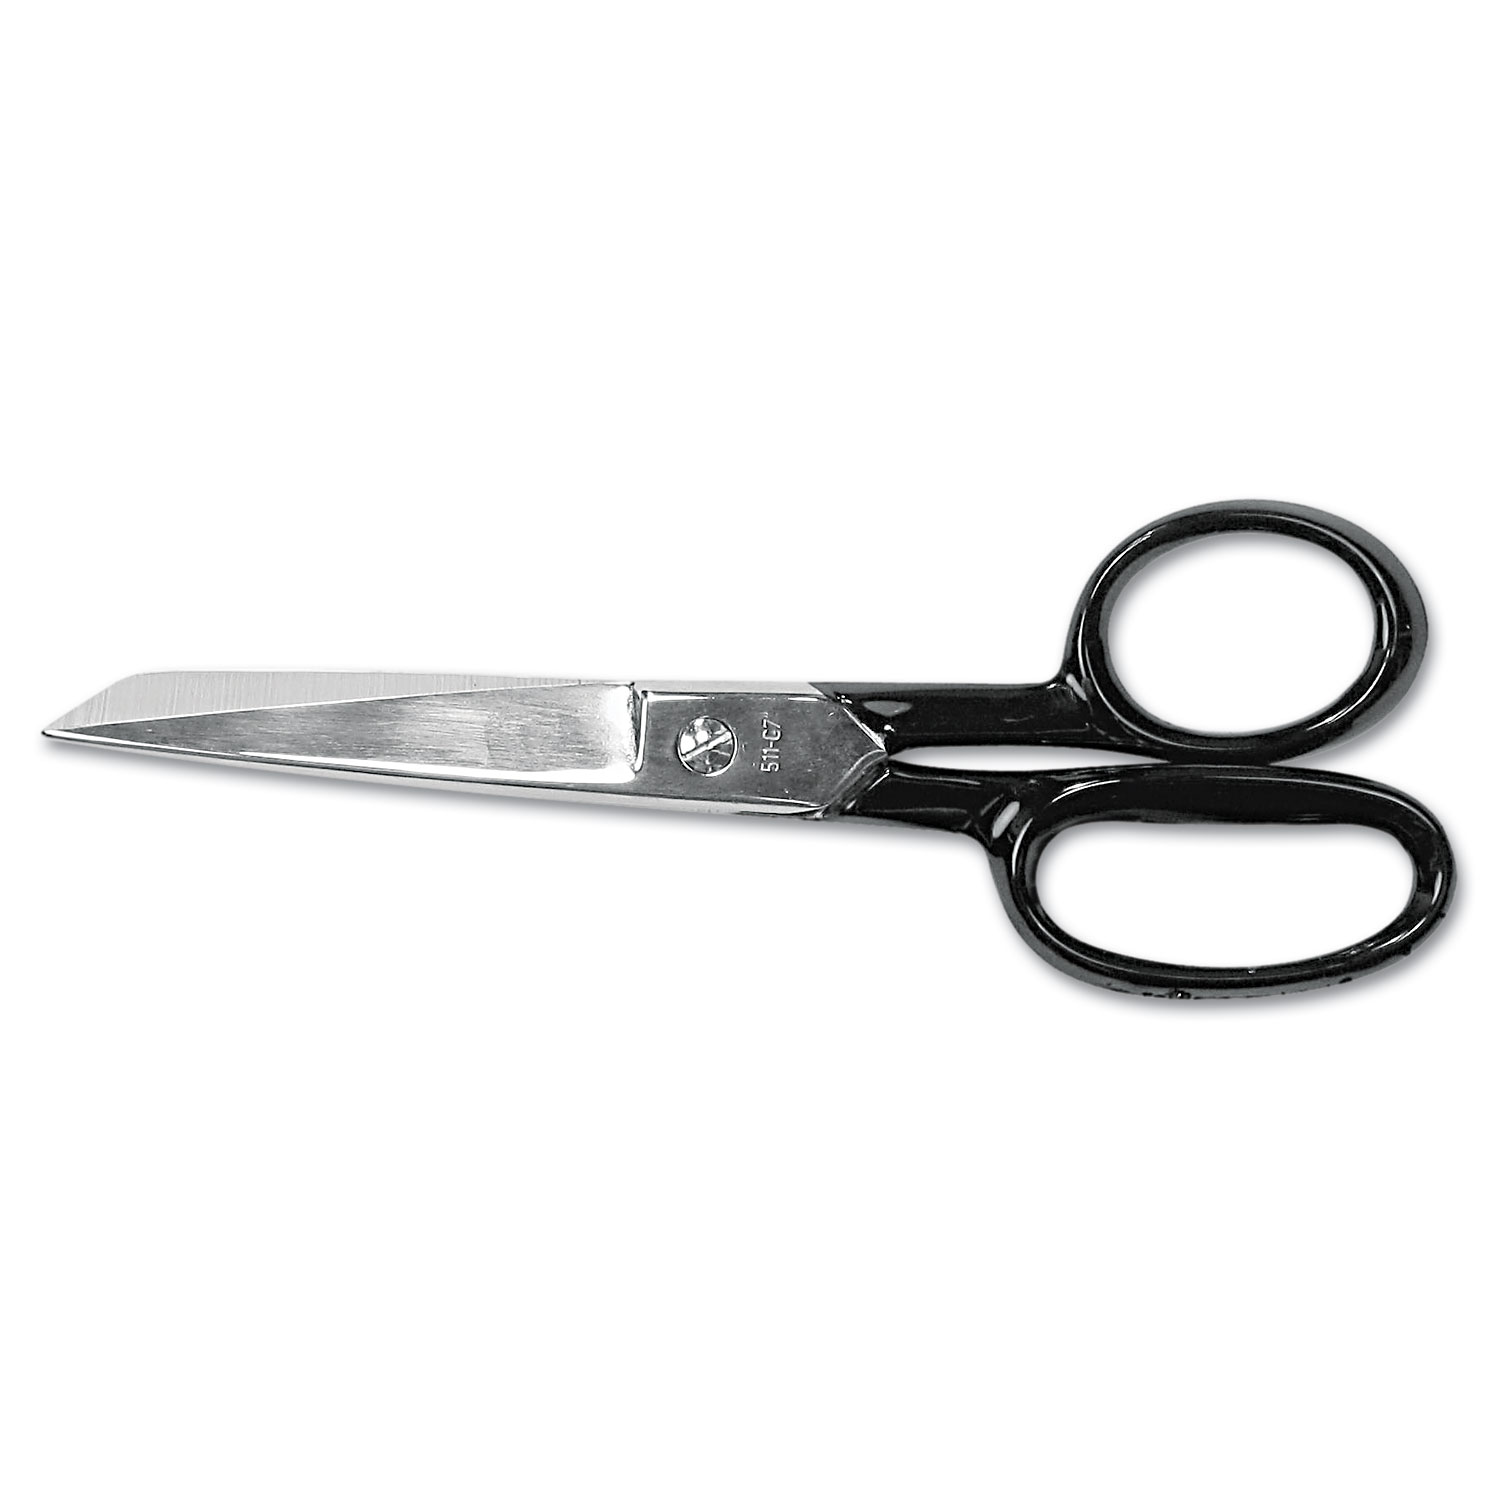  Clauss 10259 Hot Forged Carbon Steel Shears, 7 Long, 3.13 Cut Length, Black Straight Handle (ACM10259) 